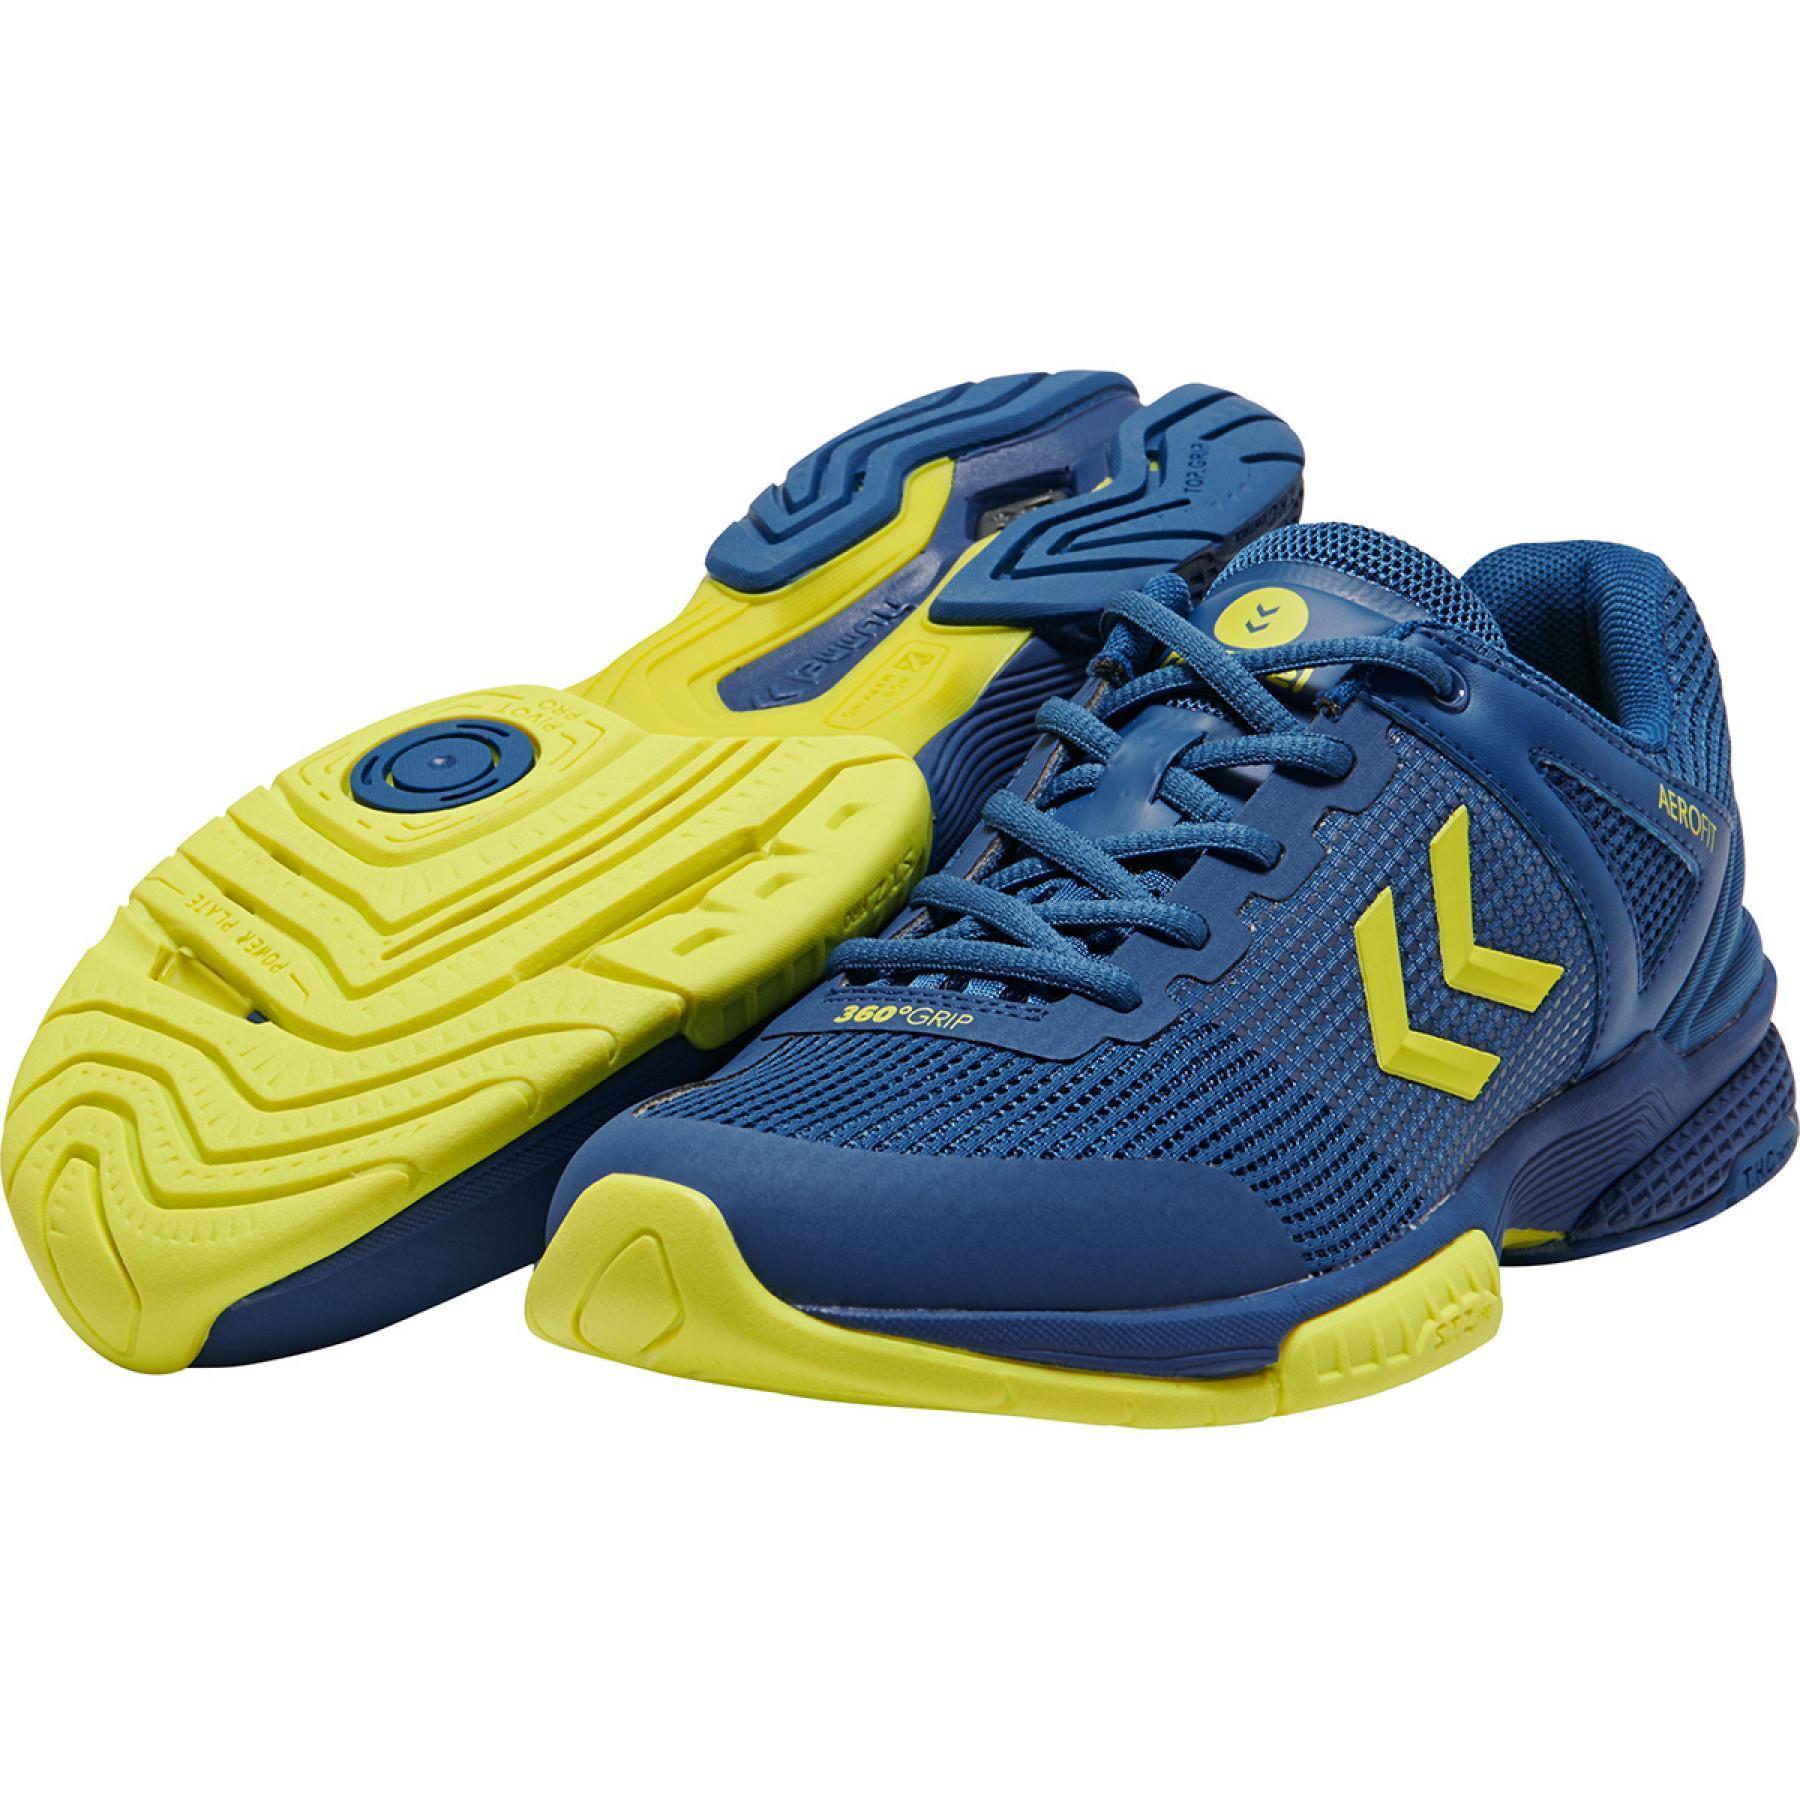 Sapatos Hummel aerocharge hb180 rely 3.0